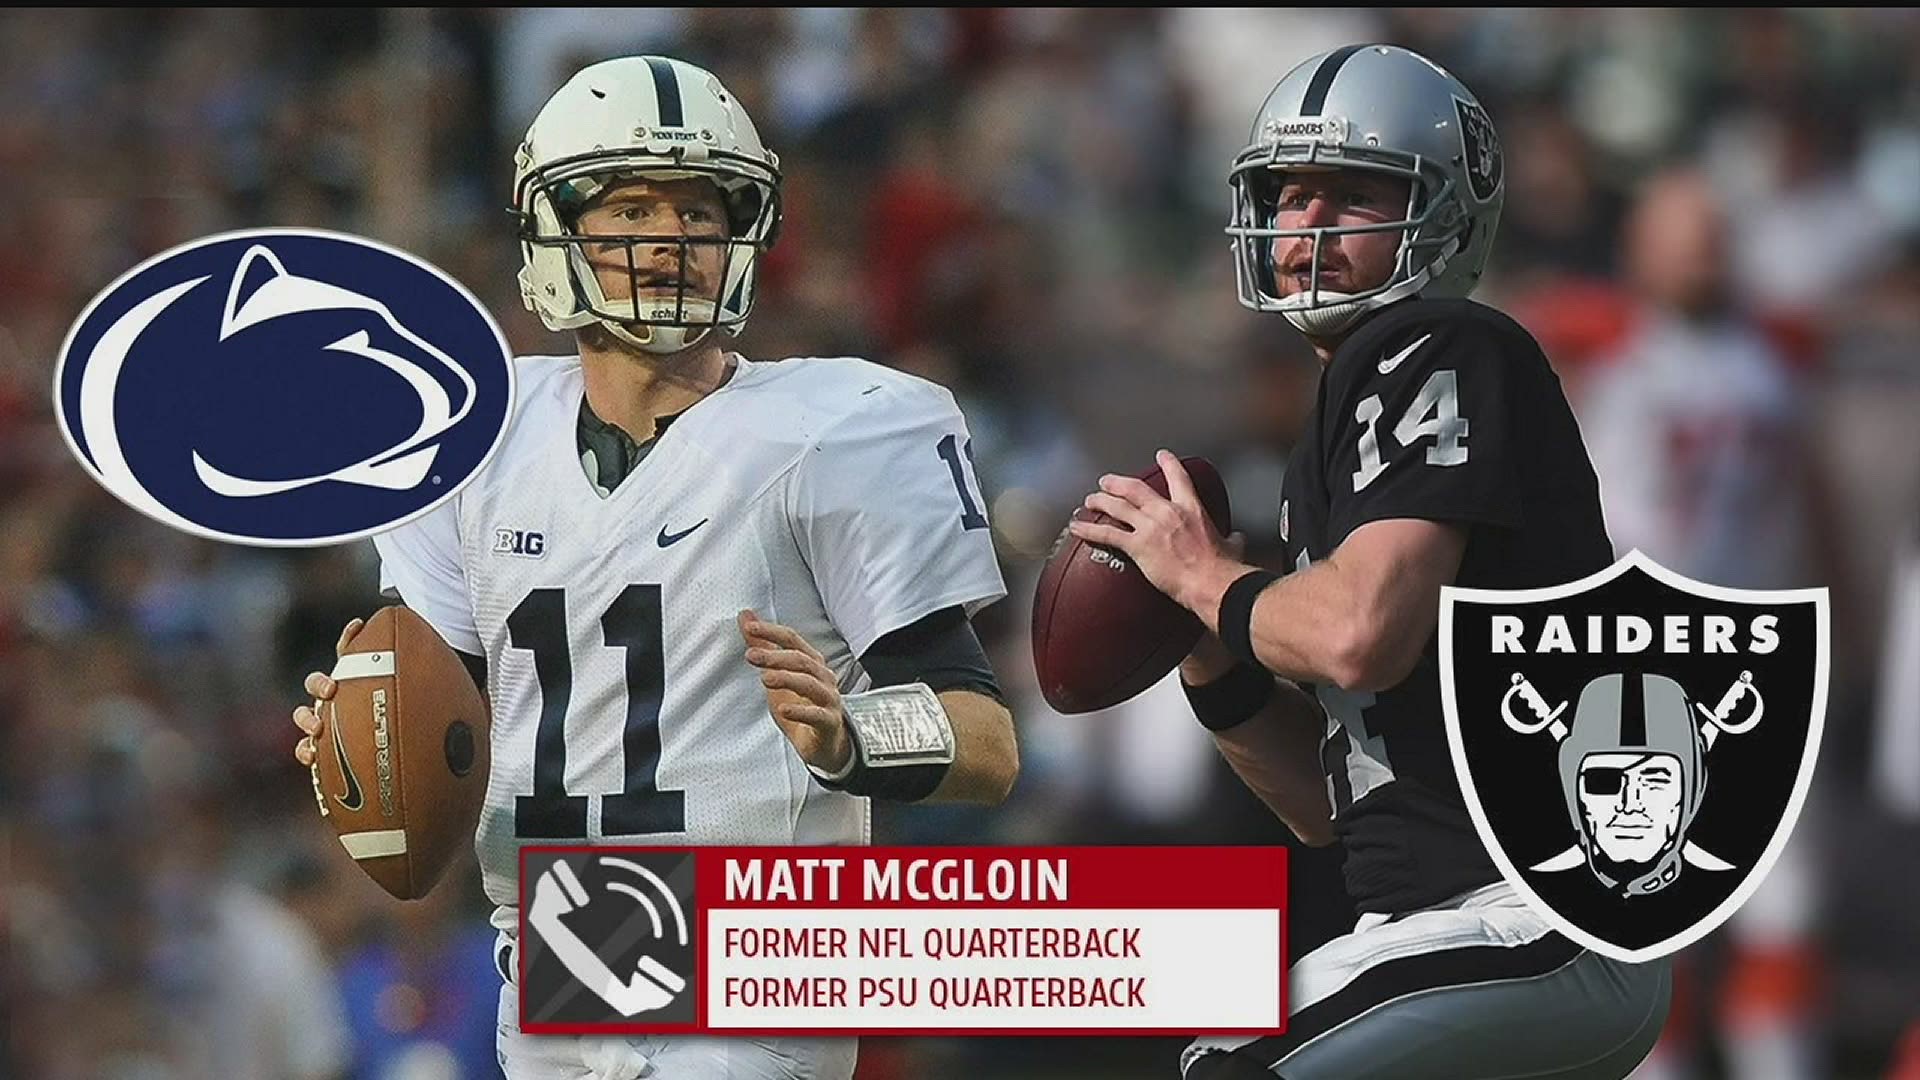 McGloin talks Penn State prospects and advice for those who don't hear there name called